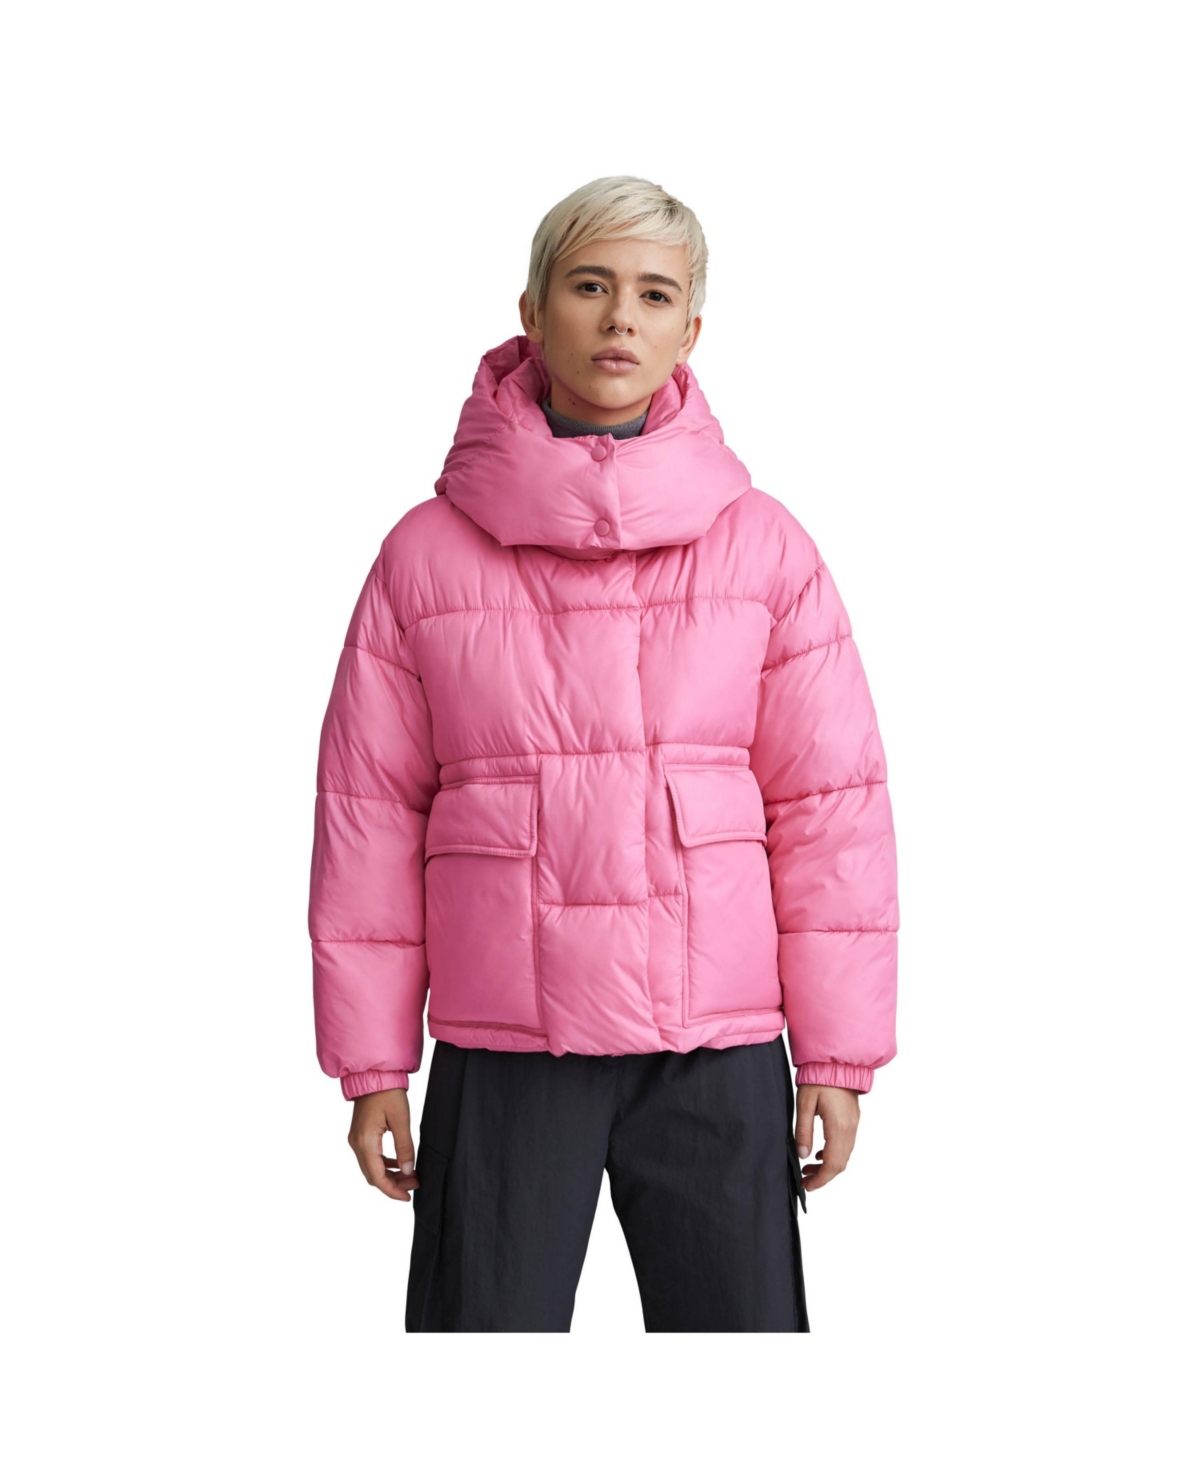 Women's Wonder Puff with Detachable Hood Jacket - Punch